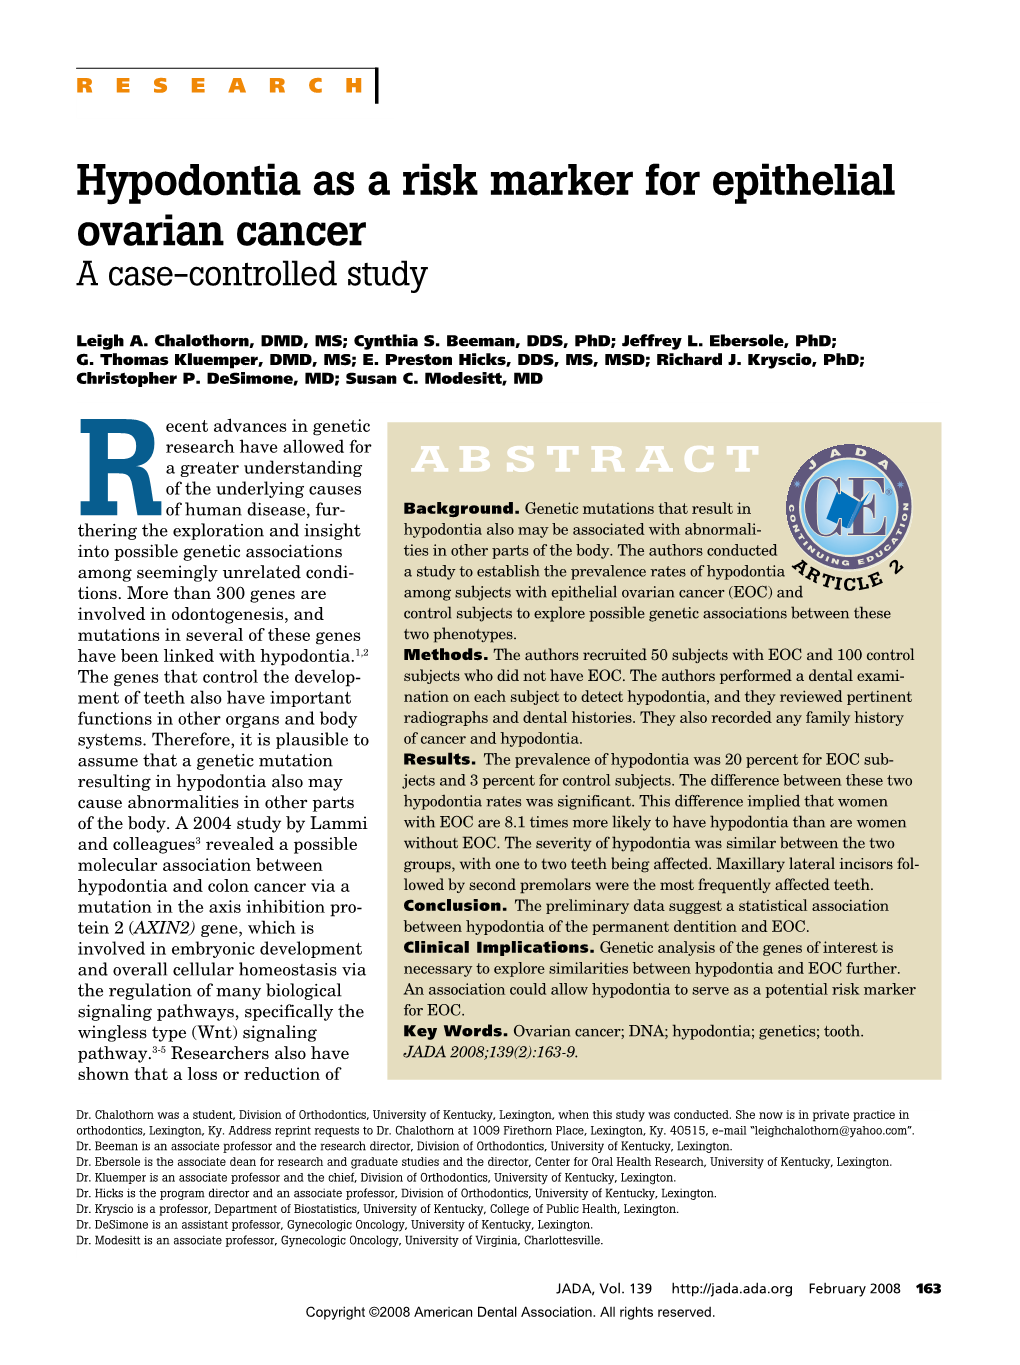 Hypodontia As a Risk Marker for Epithelial Ovarian Cancer a Case-Controlled Study